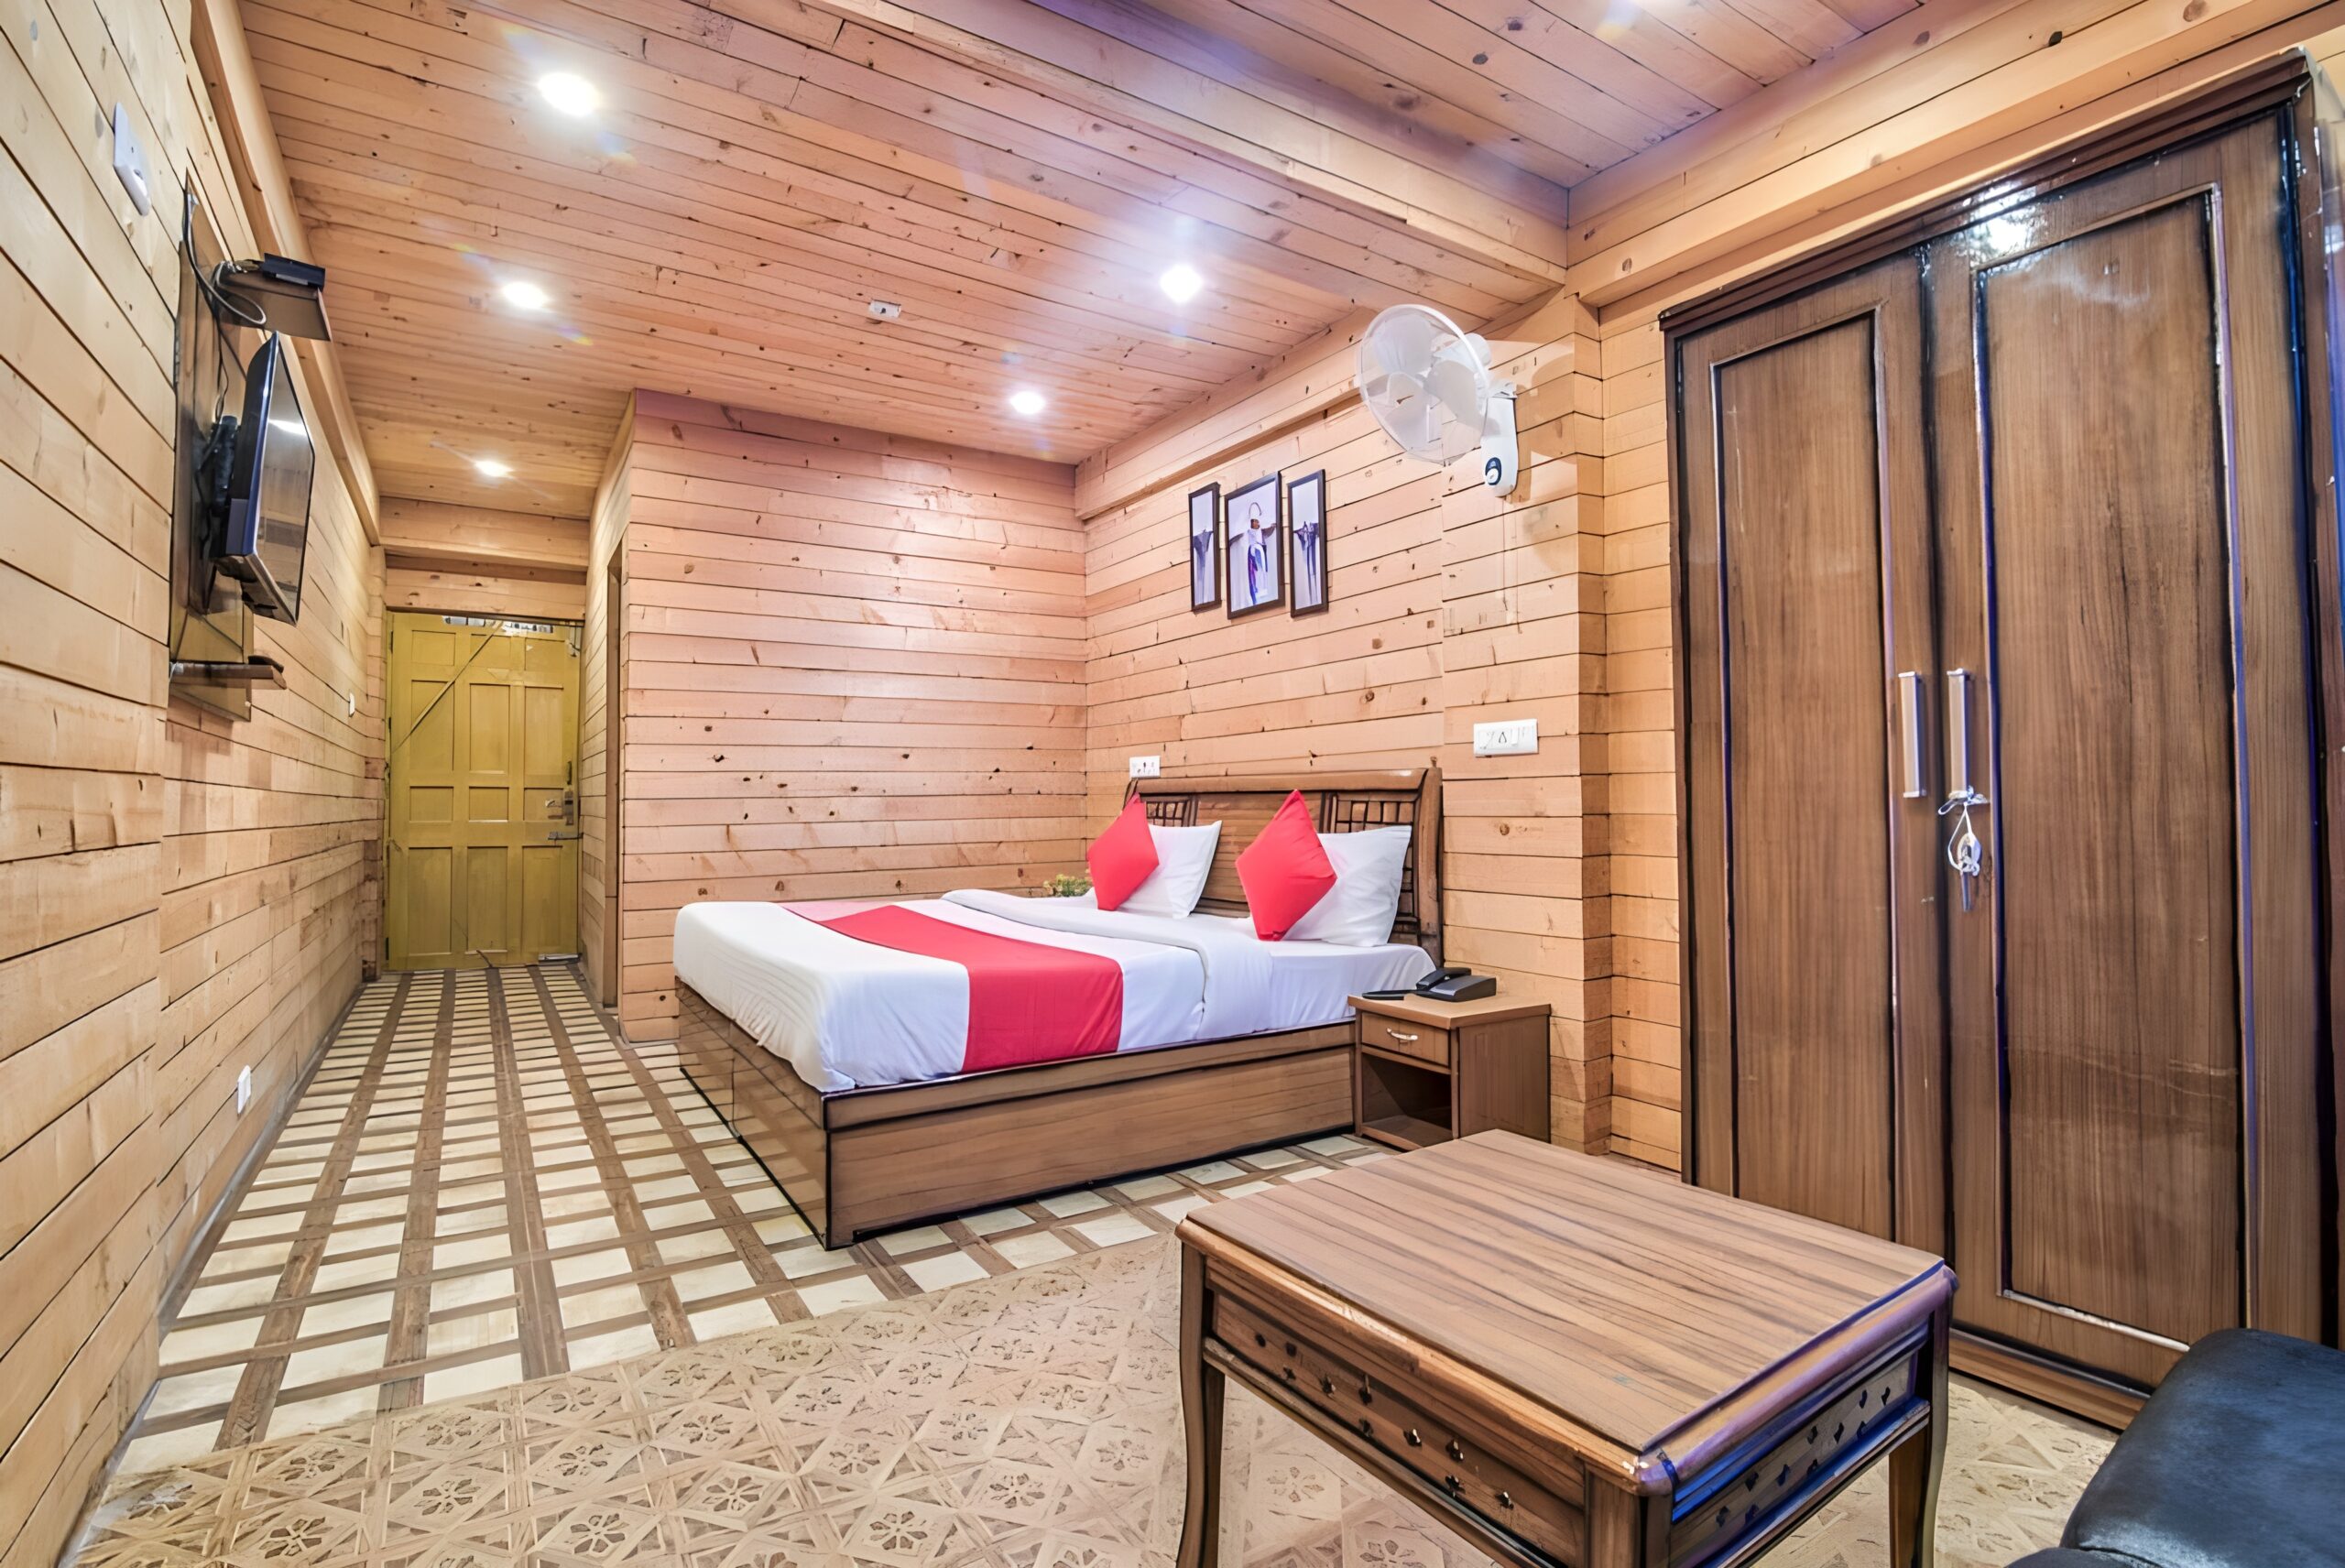 Room Designed with wooden Paneling.